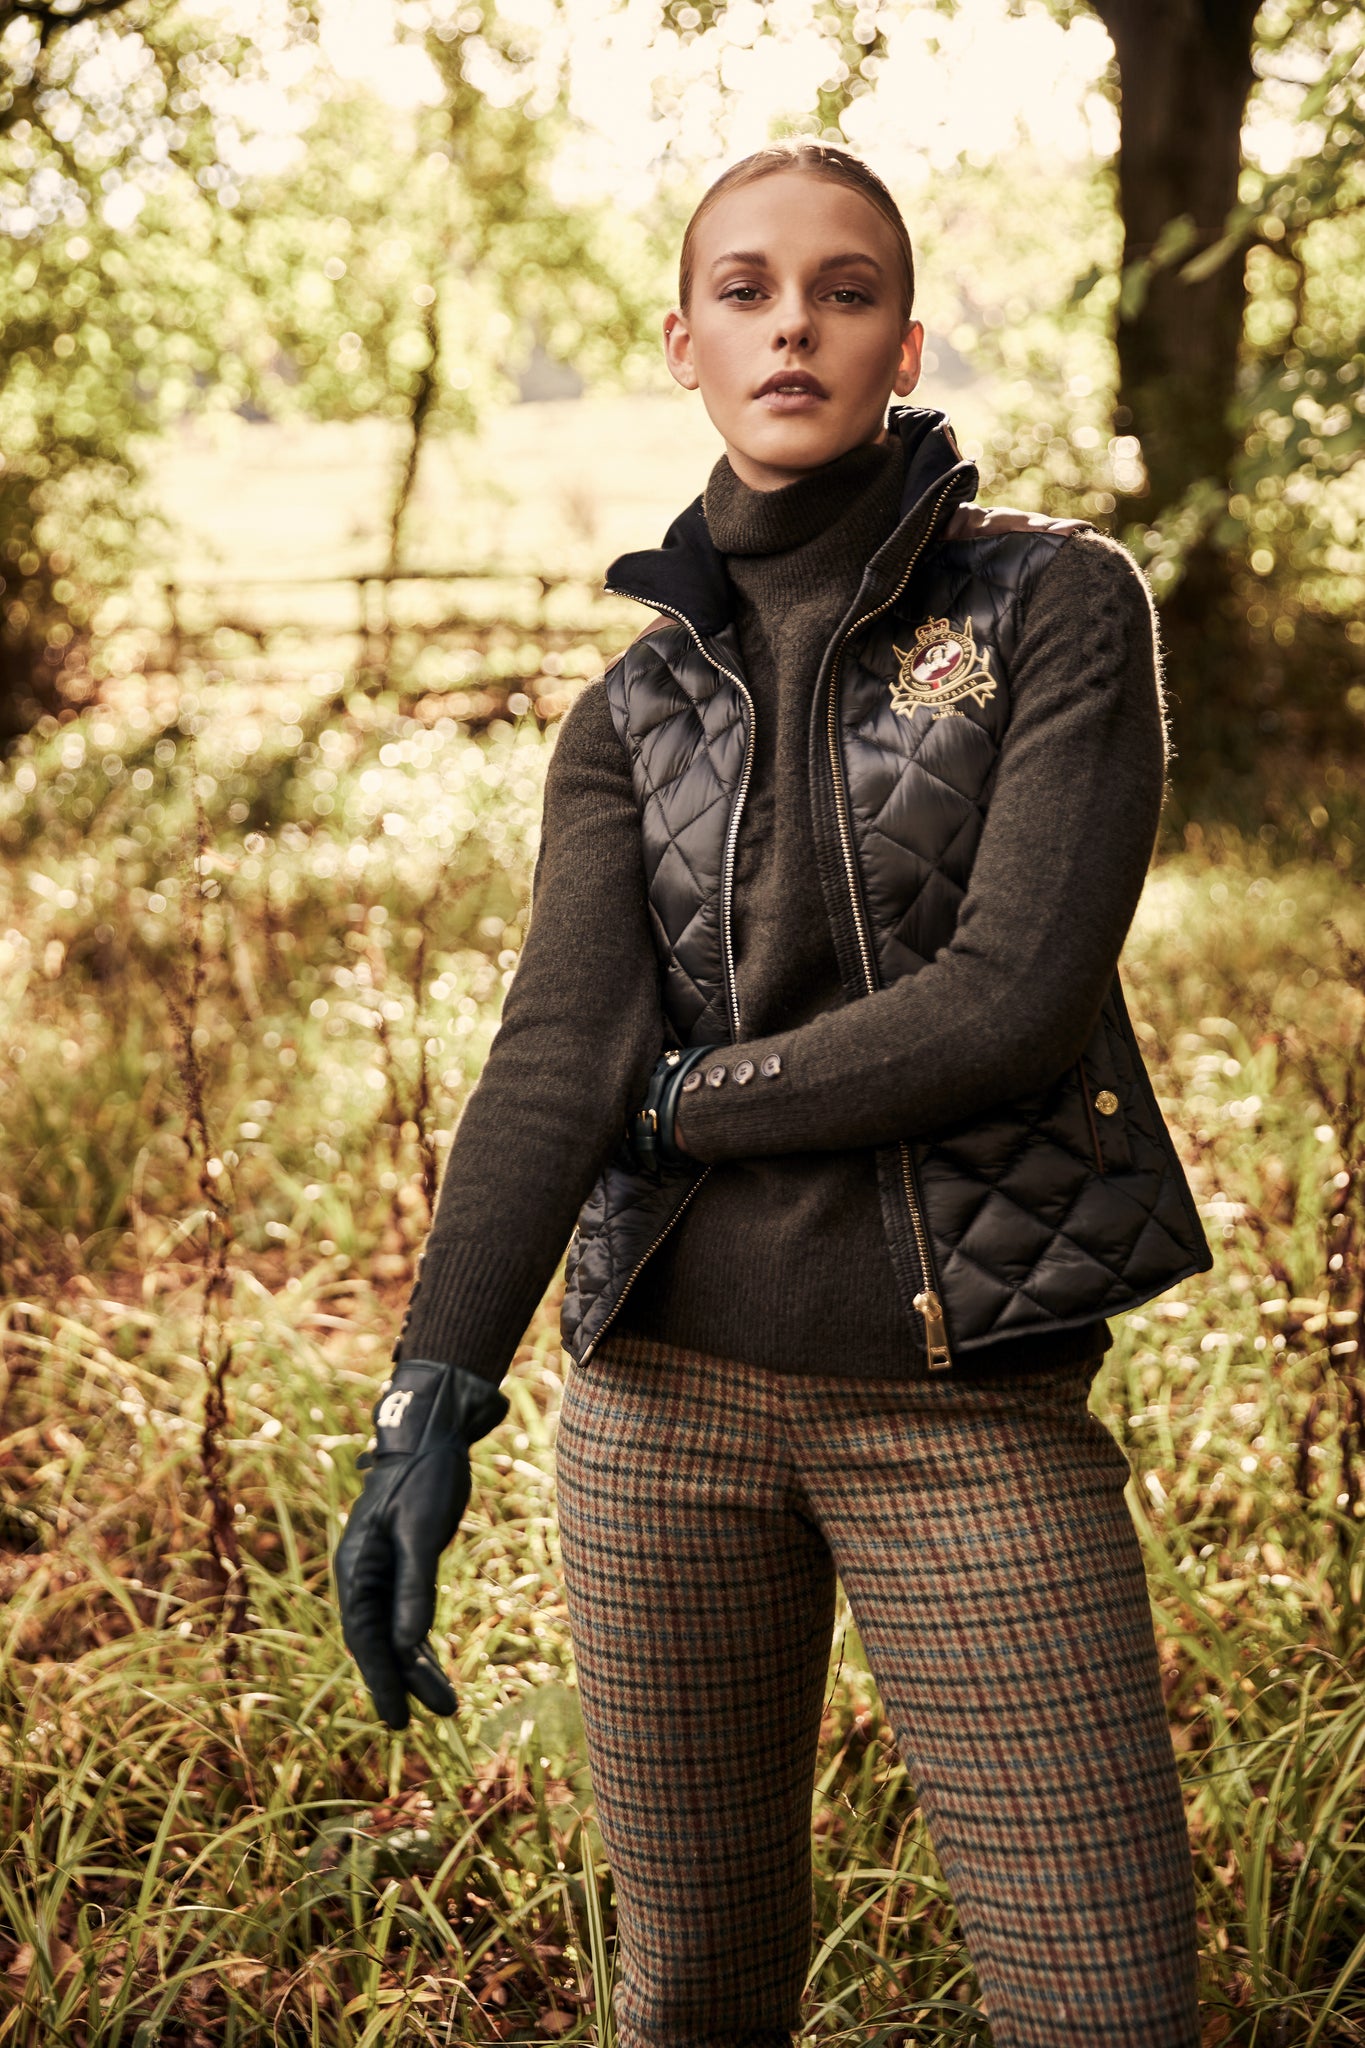 Chunky knit roll neck jumper in fern green layered under a black diamond quilted gilet and worn with black gloves